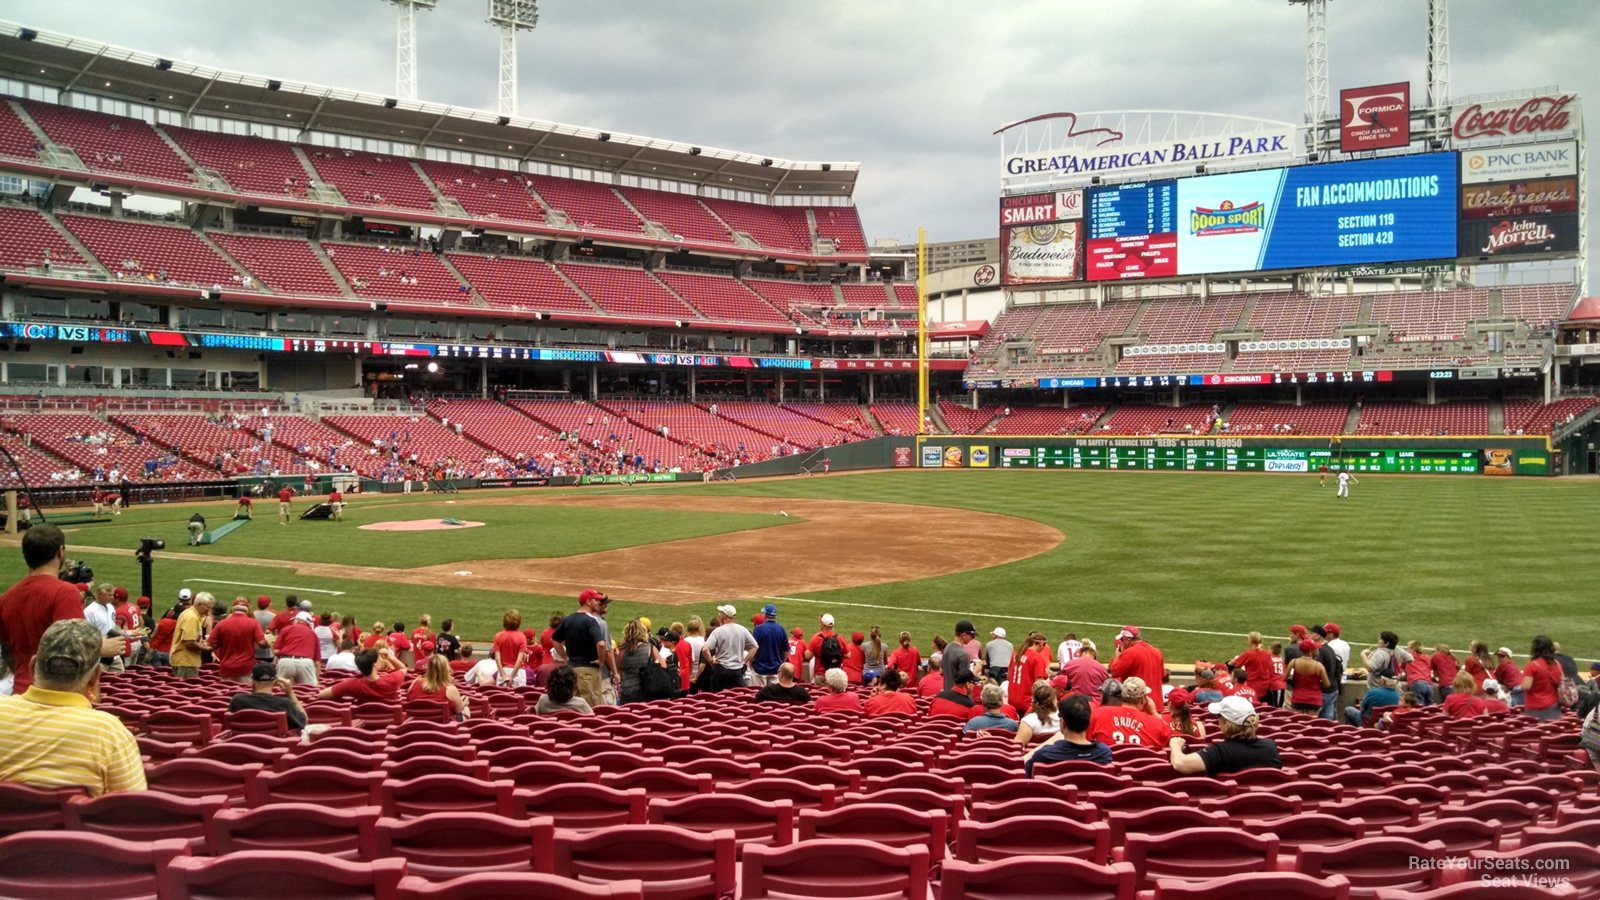 Gabp Seating Chart With Rows